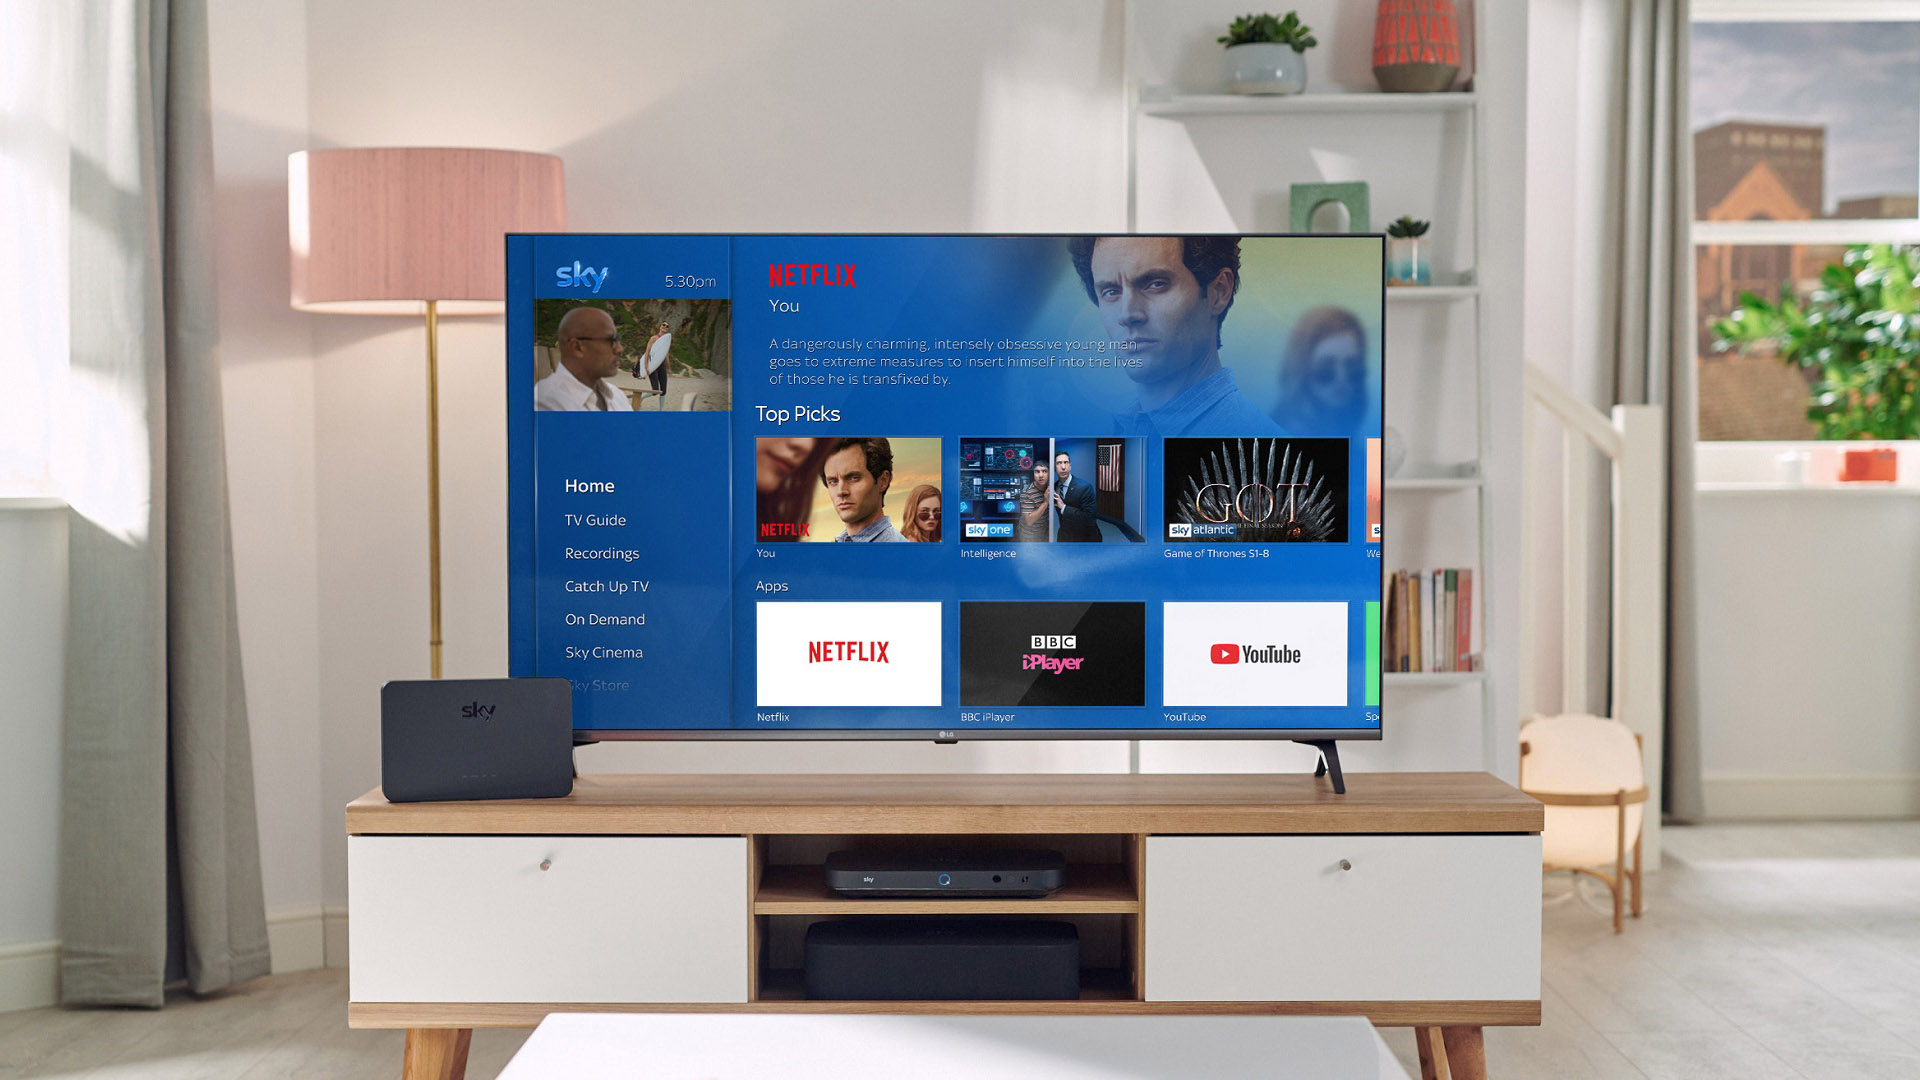 sky-ultimate-on-demand-get-netflix-and-sky-in-one-package-techradar